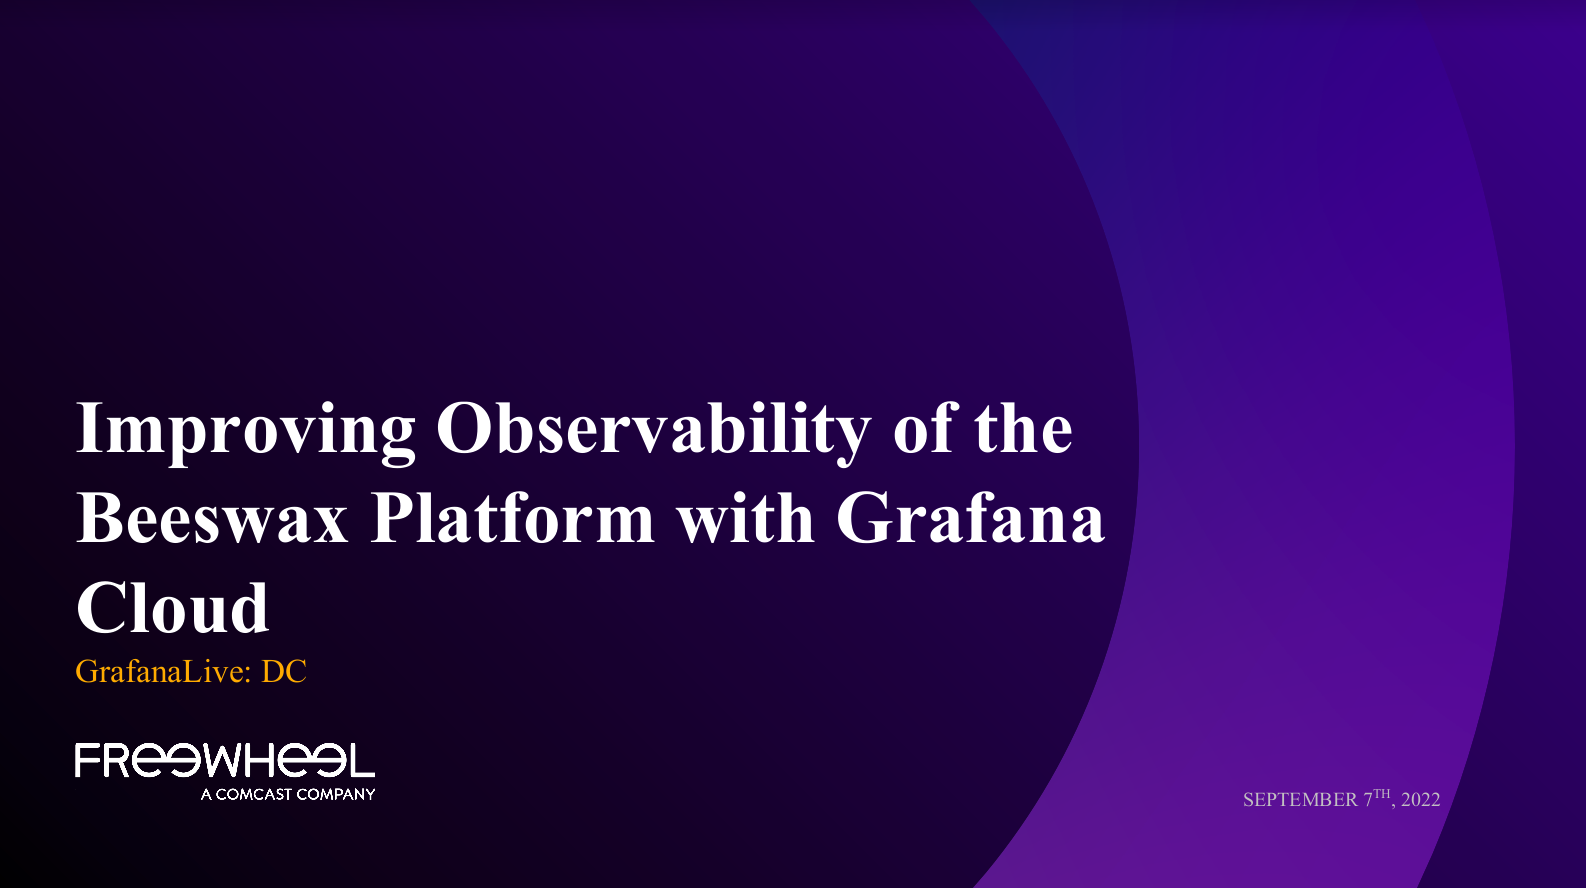 GrafanaLive: Improving Observability of the Beeswax platform with Grafana Cloud